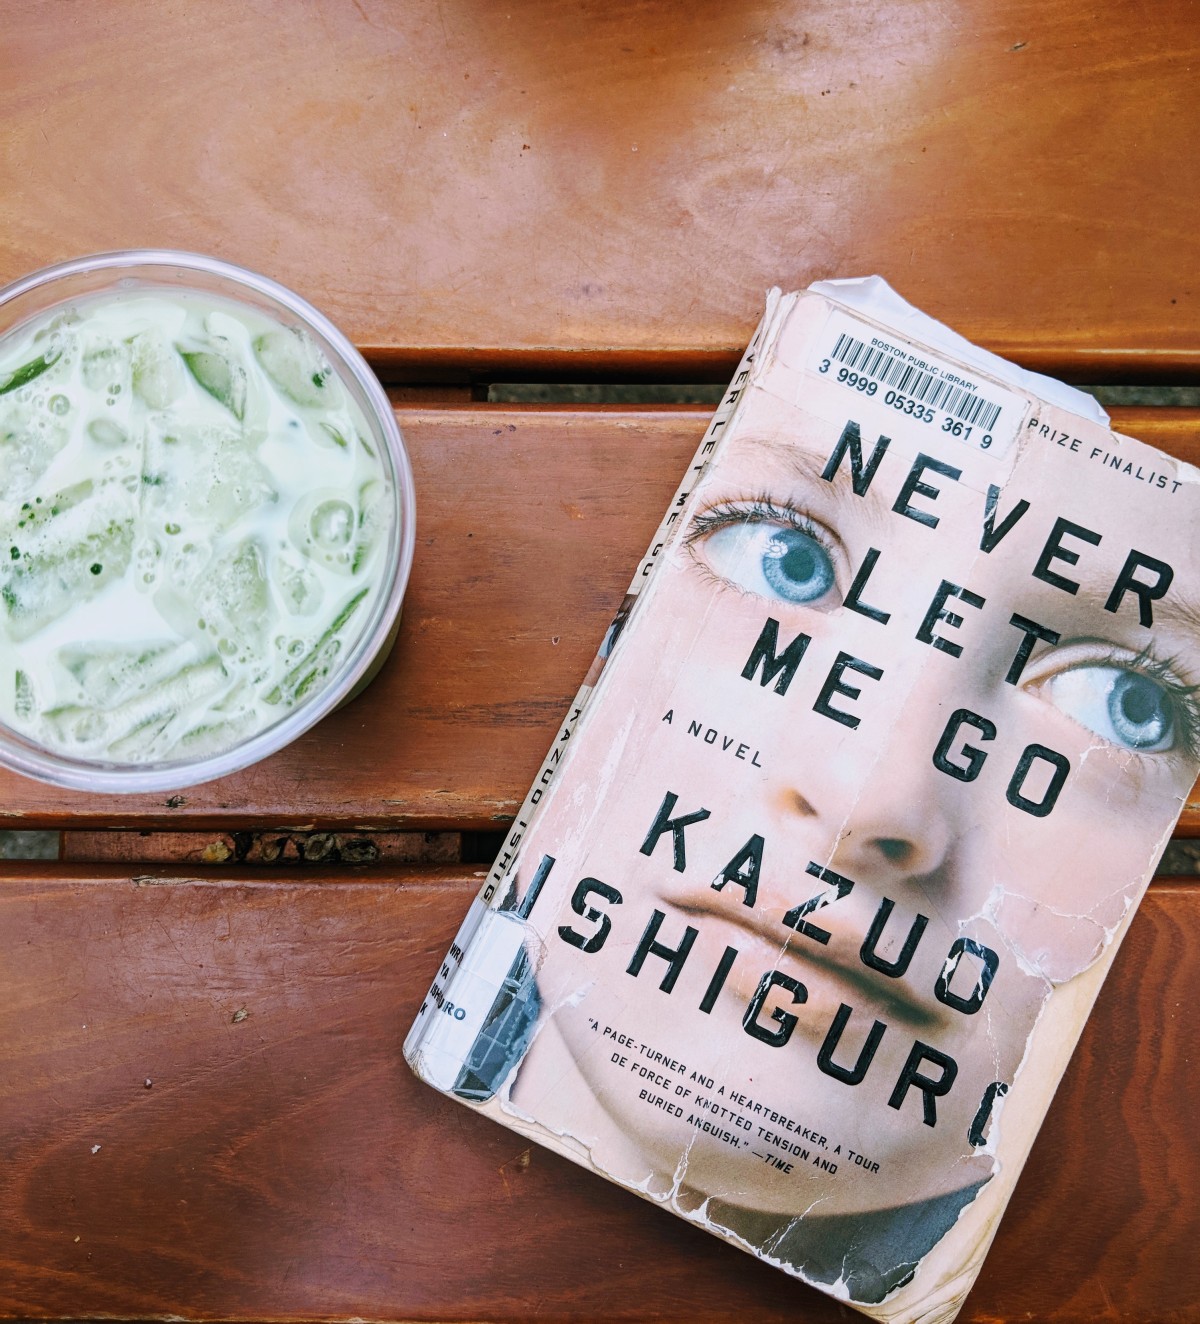 Five Things About Never Let Me Go by Kazuo Ishiguro